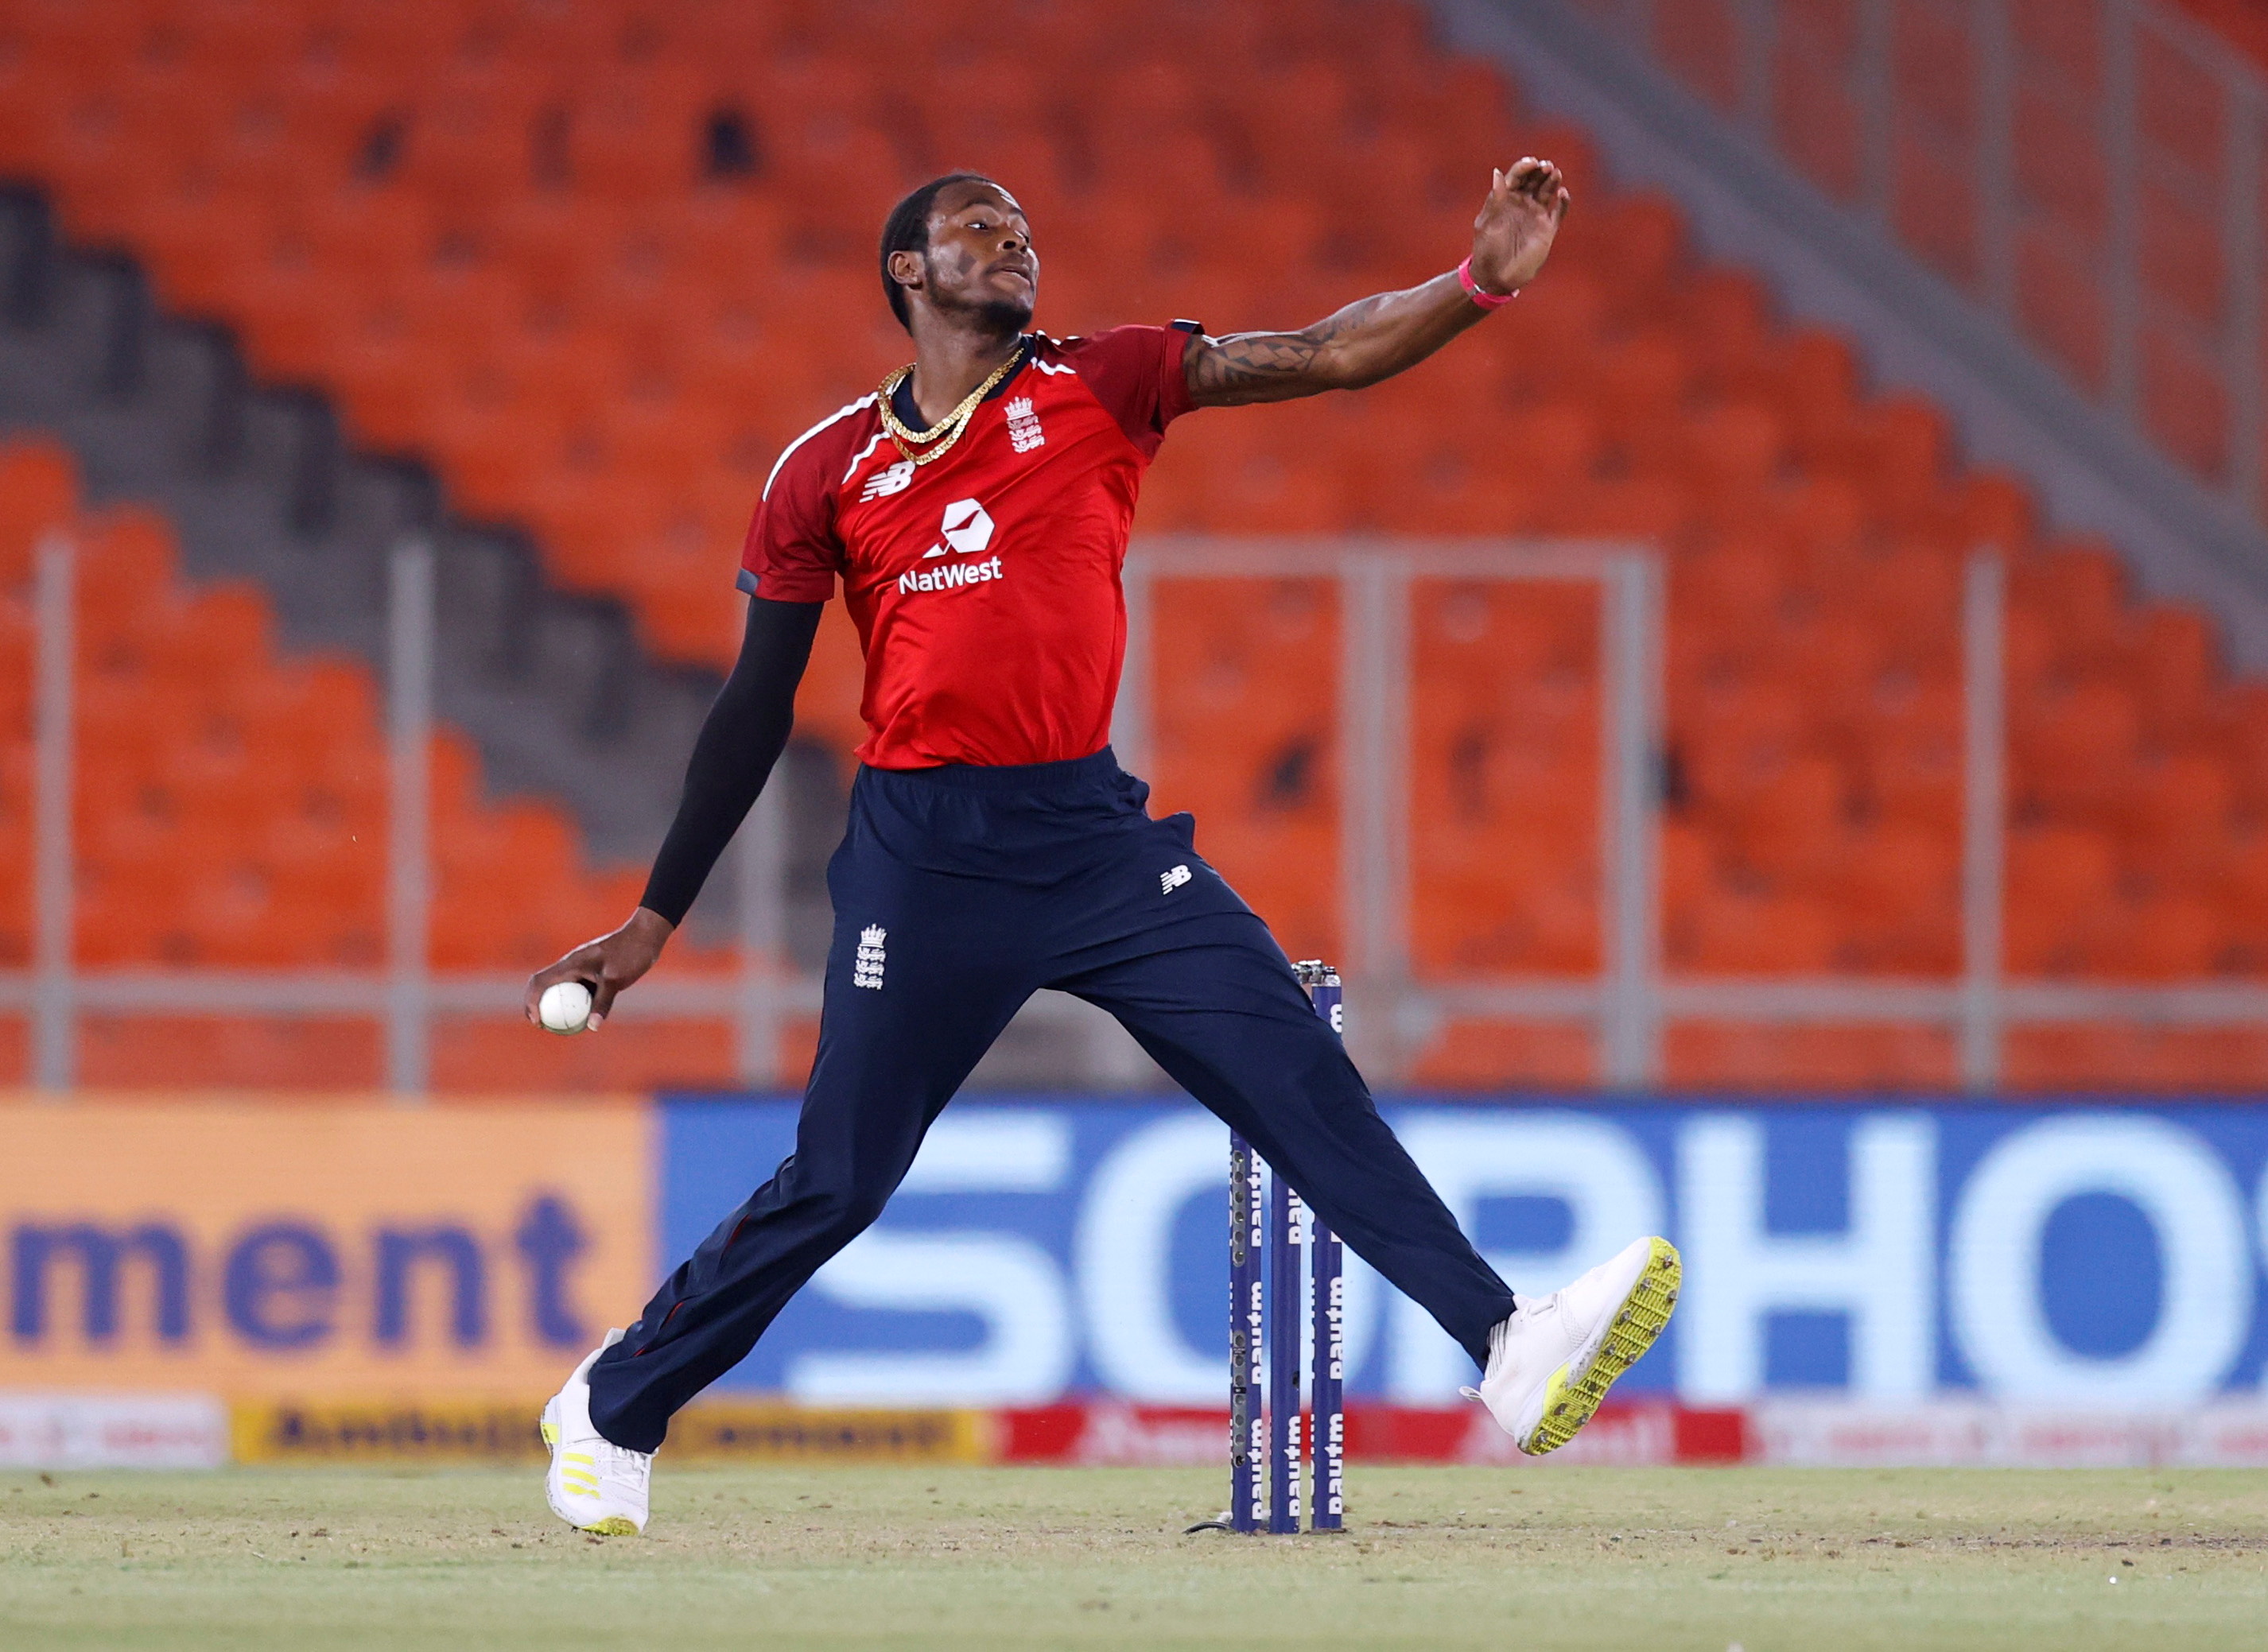 Jofra Archer (IPL Auction): "I'm excited to begin a new chapter with the Mumbai Indians." 